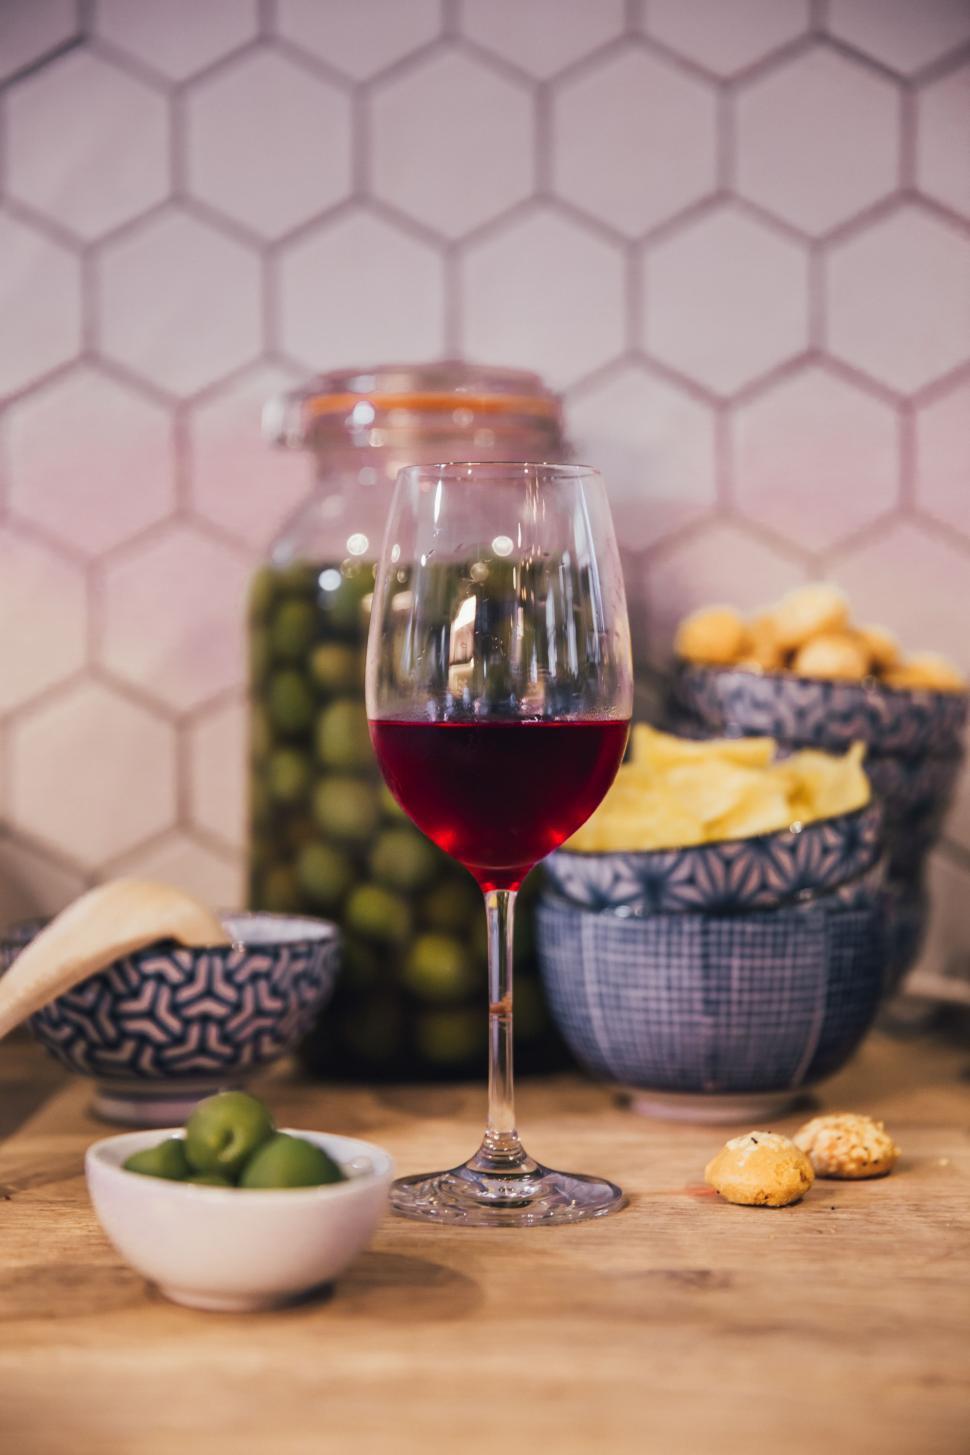 Free Image of Red wine and olives in the kitchen 